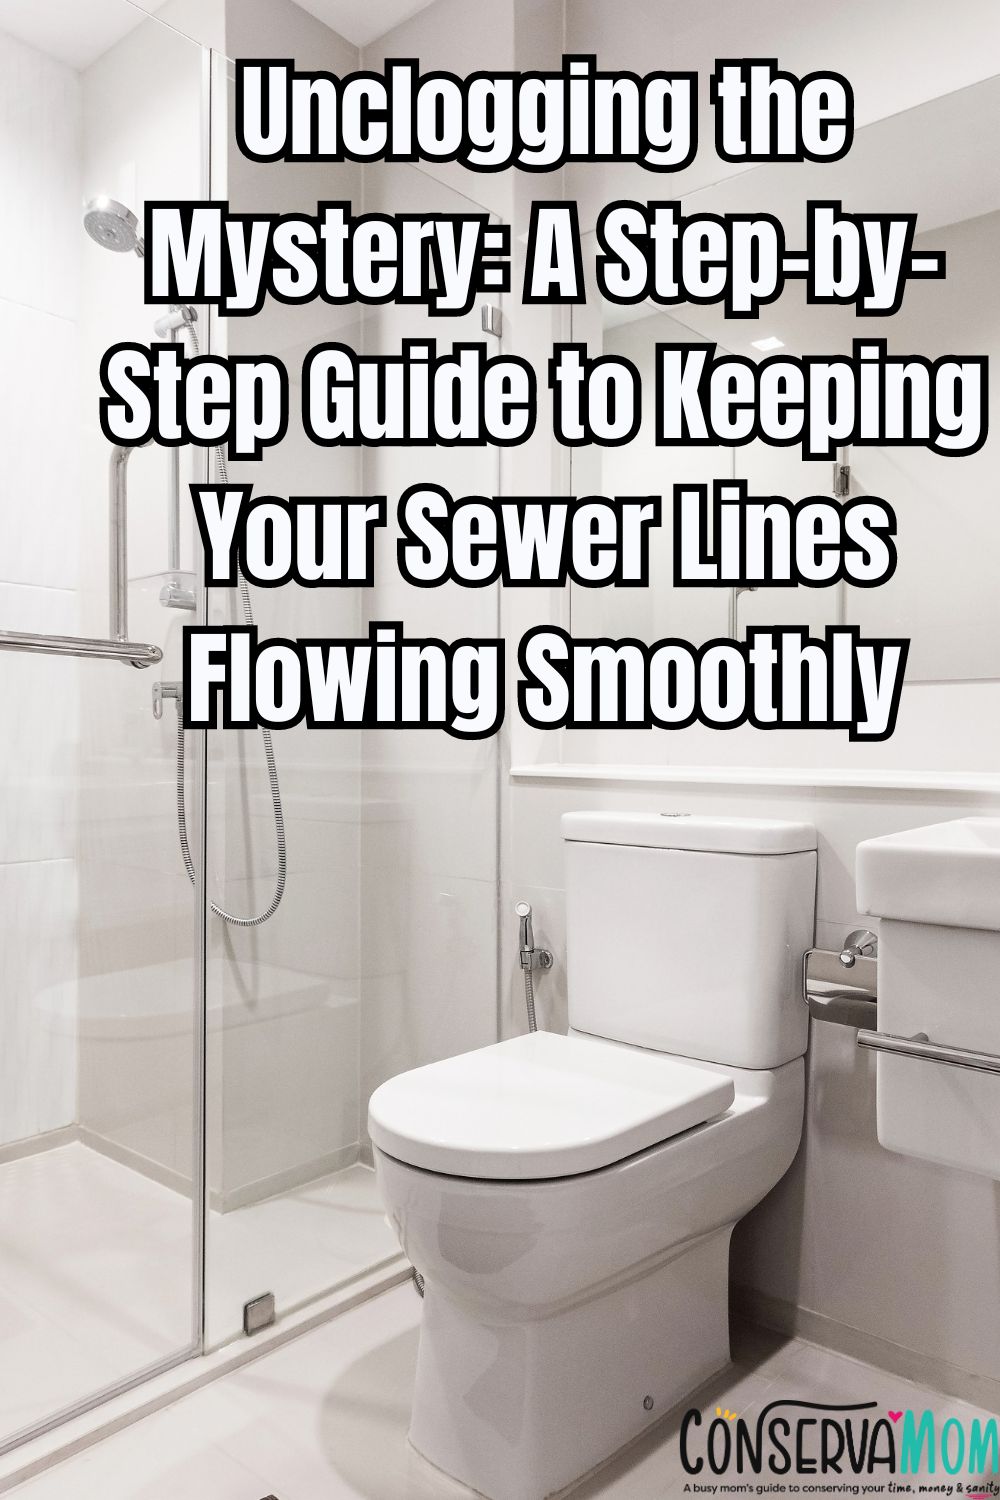 Unclogging the Mystery A Step-by-Step Guide to Keeping Your Sewer Lines Flowing Smoothly 